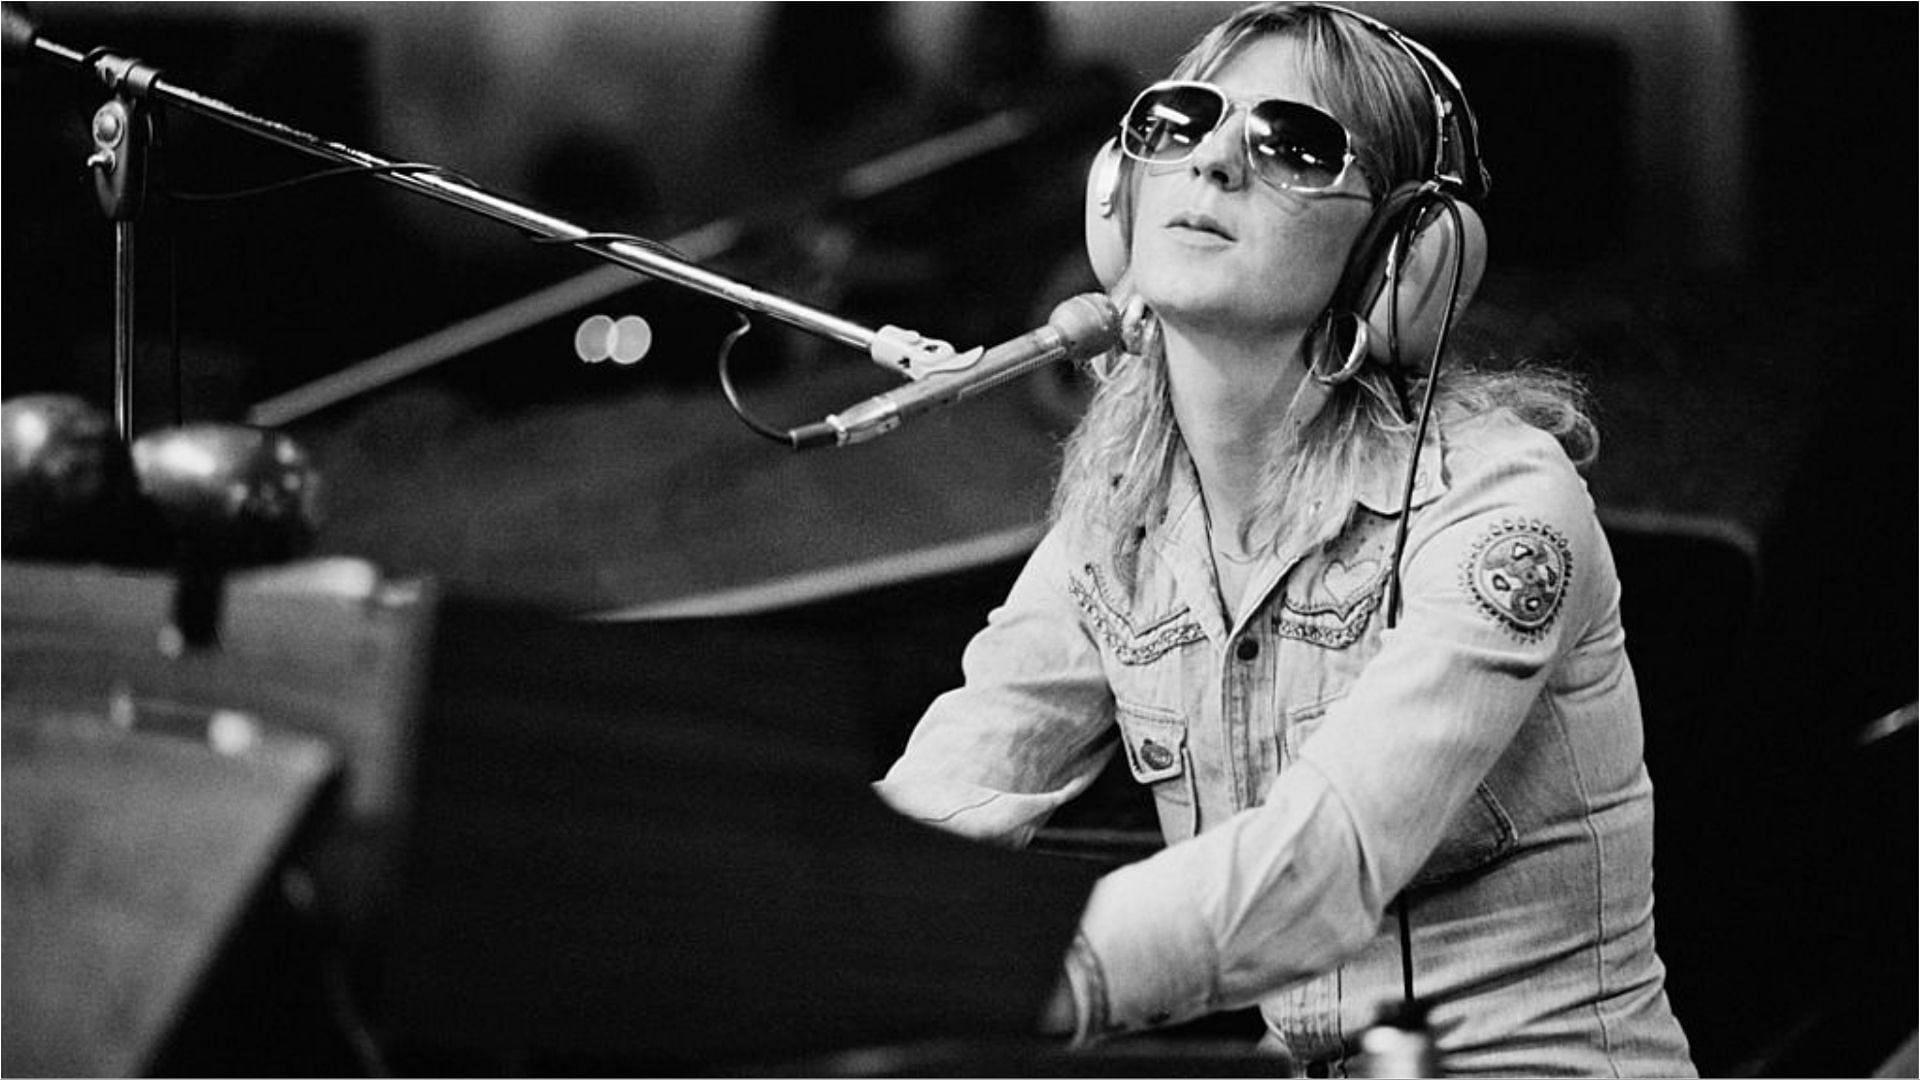 Christine McVie was known as a member of Fleetwood Mac (Image via Fin Costello/Getty Images)